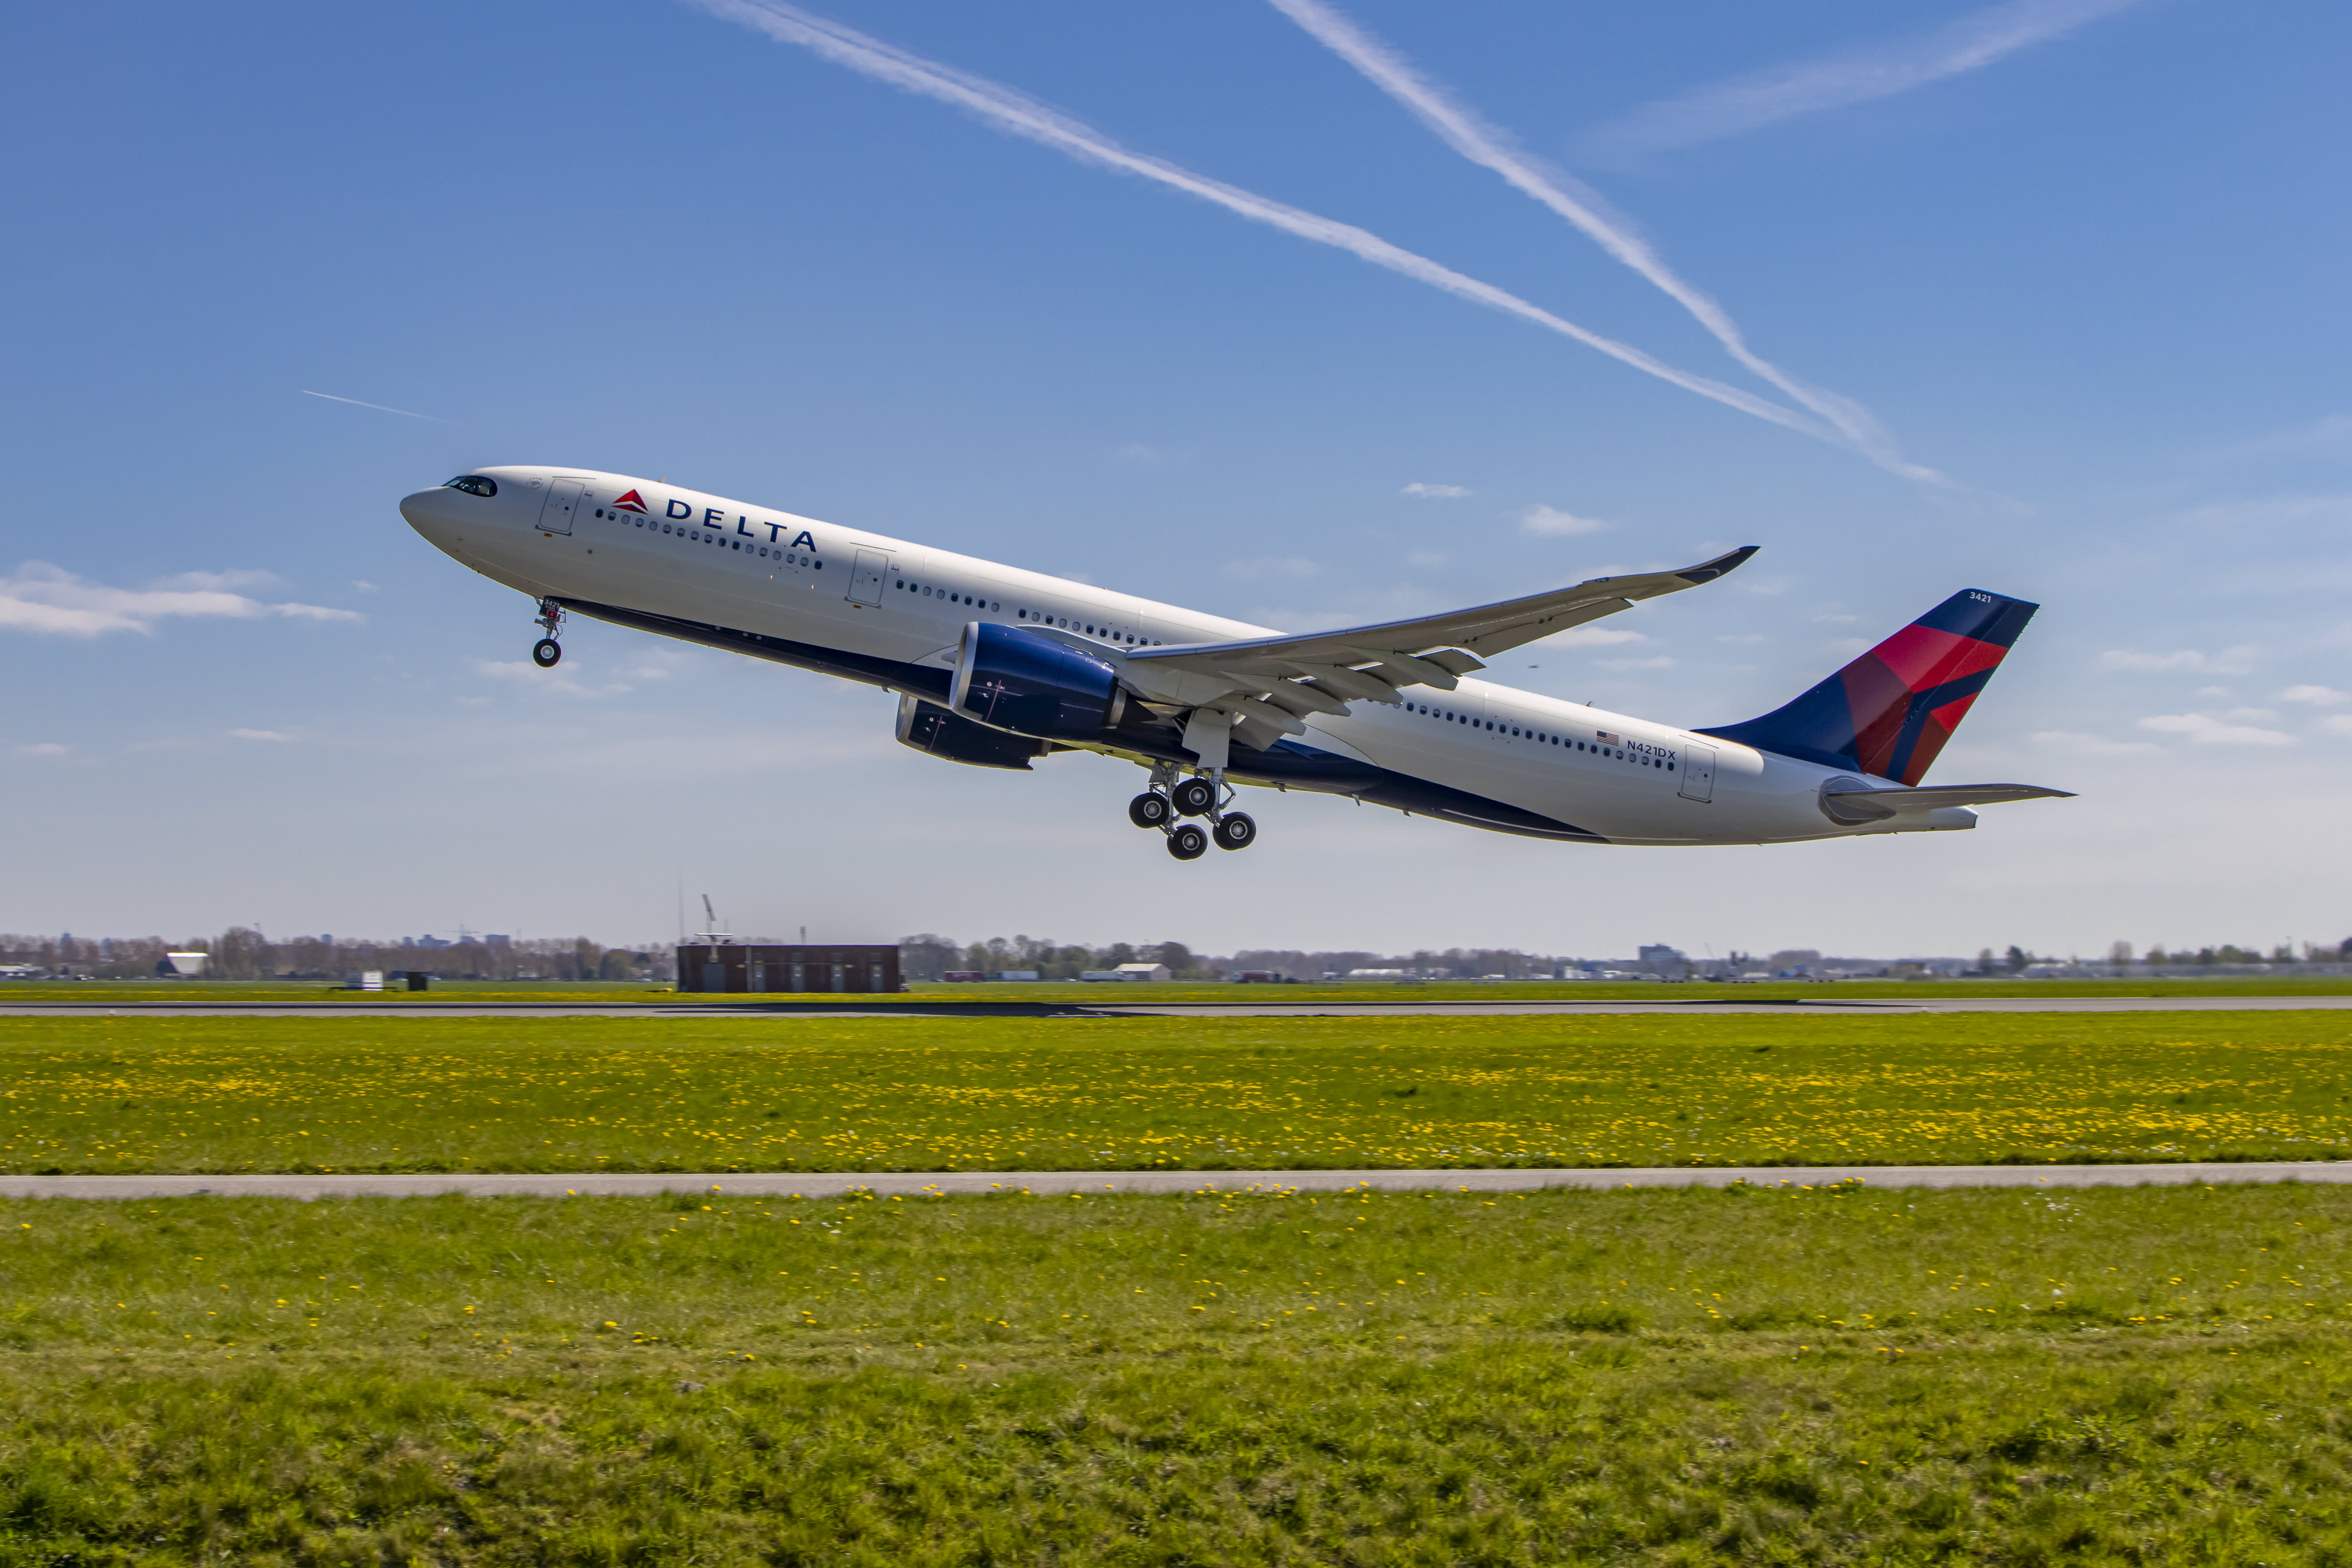 Delta lifts profit forecast thanks to strong demand and premium tickets